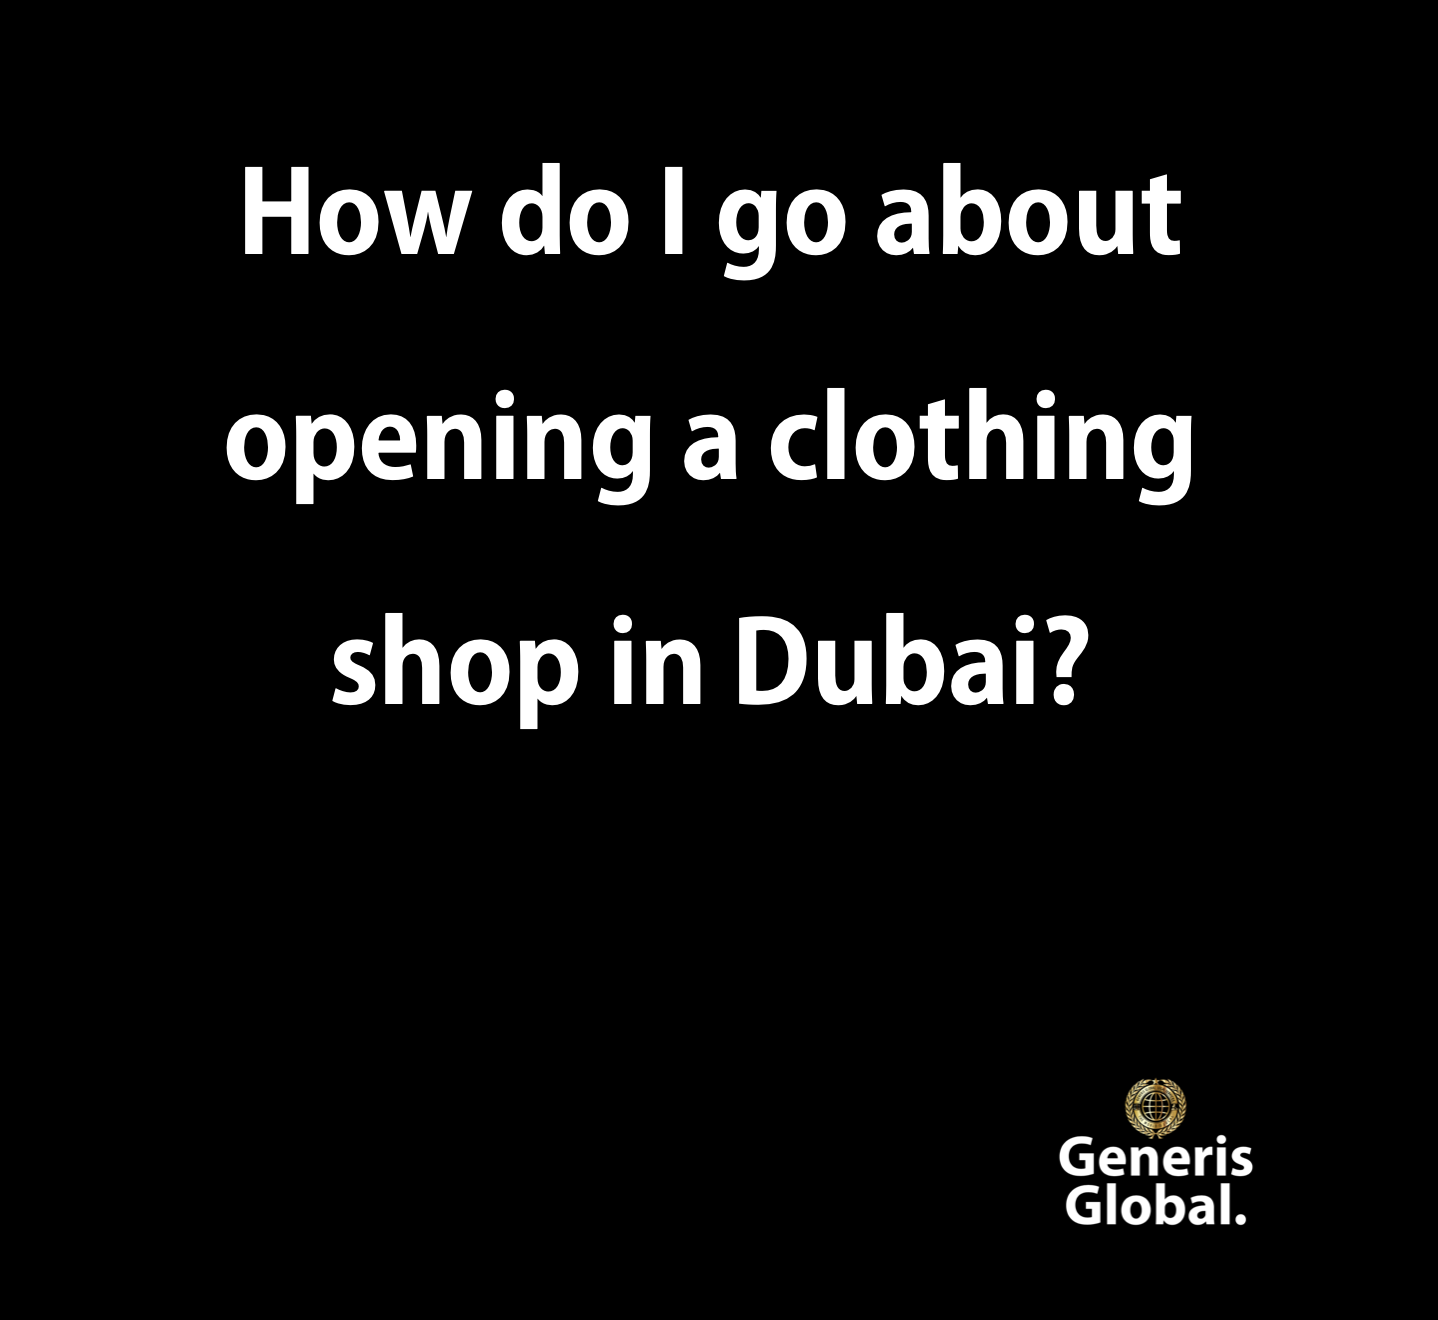 opening a clothing shop in Dubai